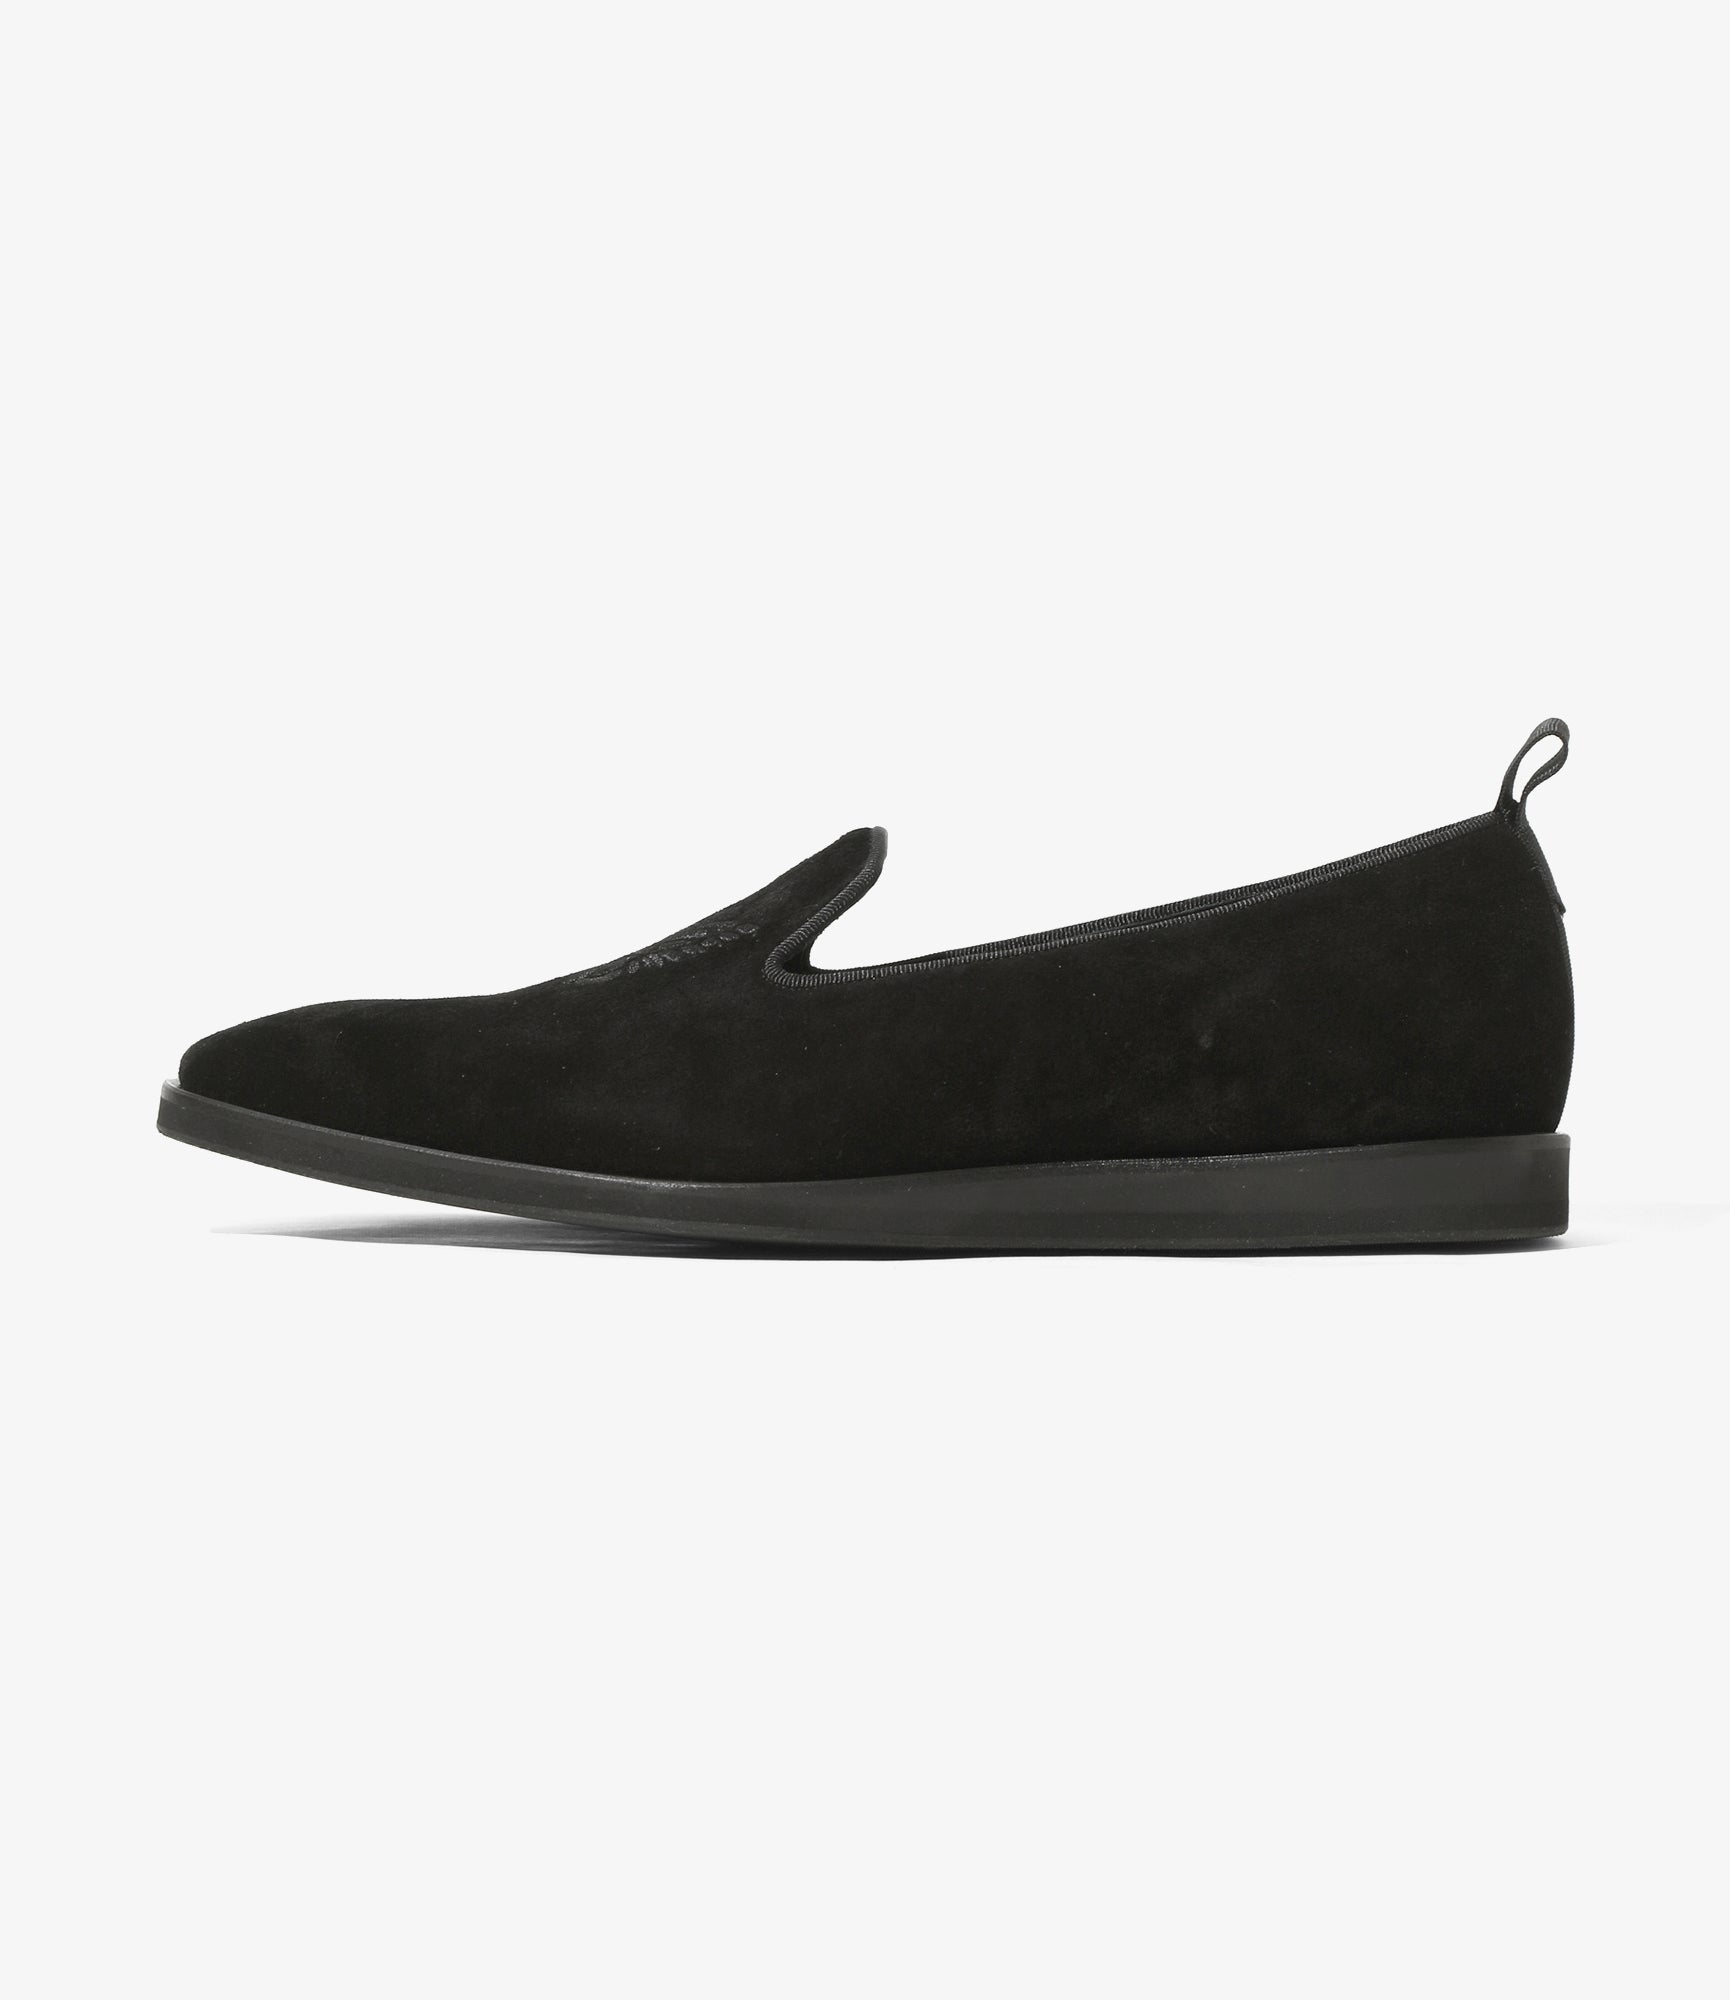 Footwear | Nepenthes London